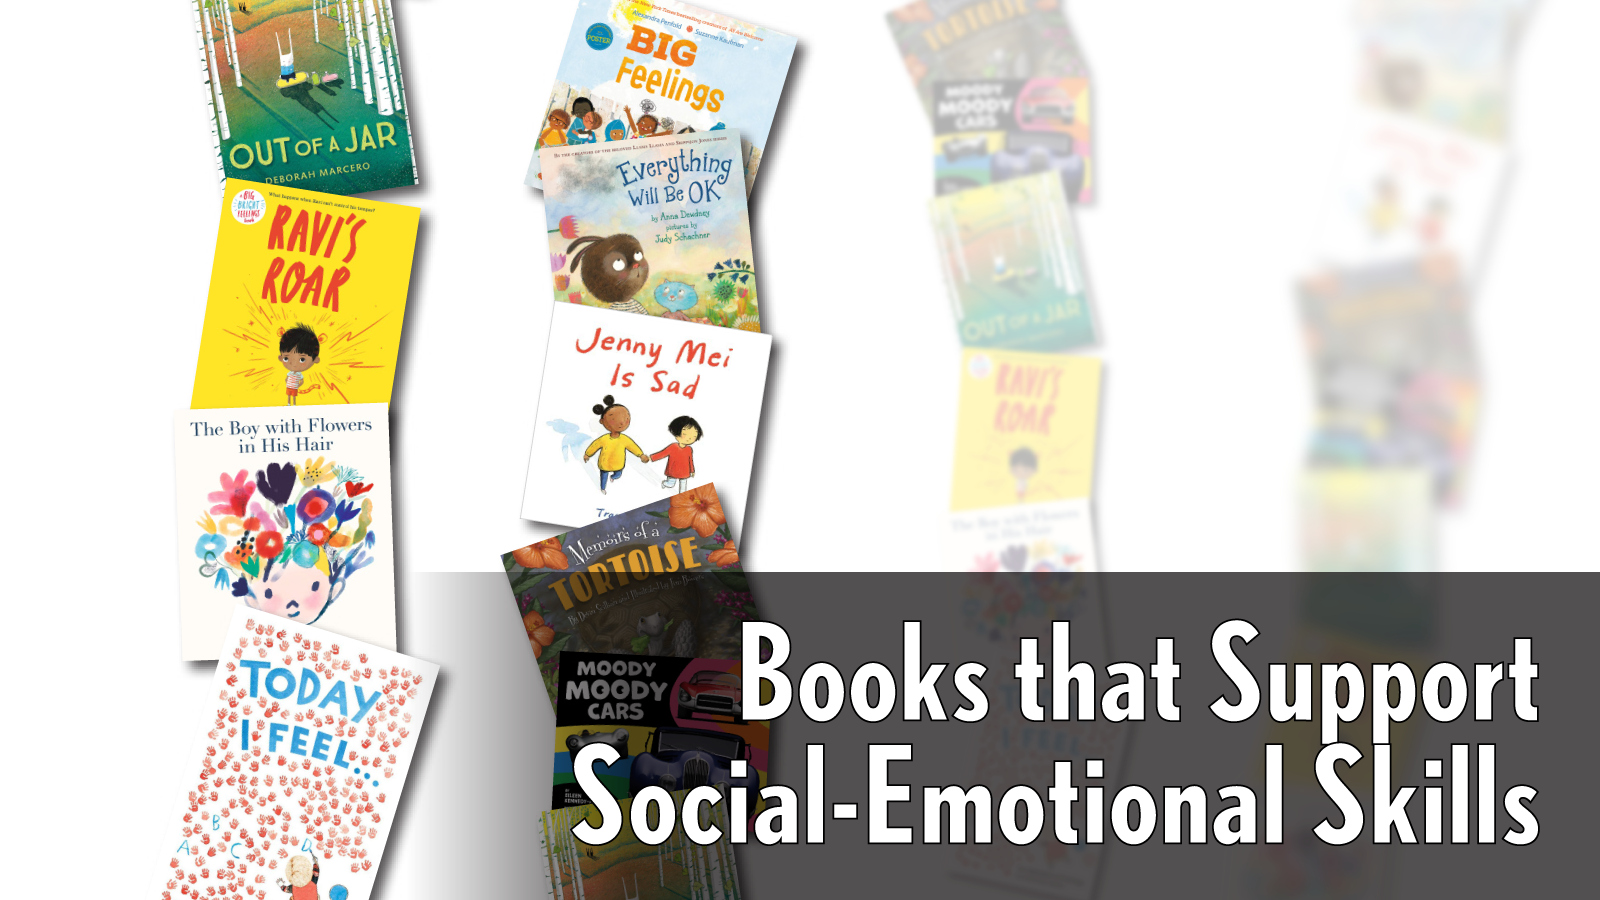 Books that Support Social-Emotion Skills